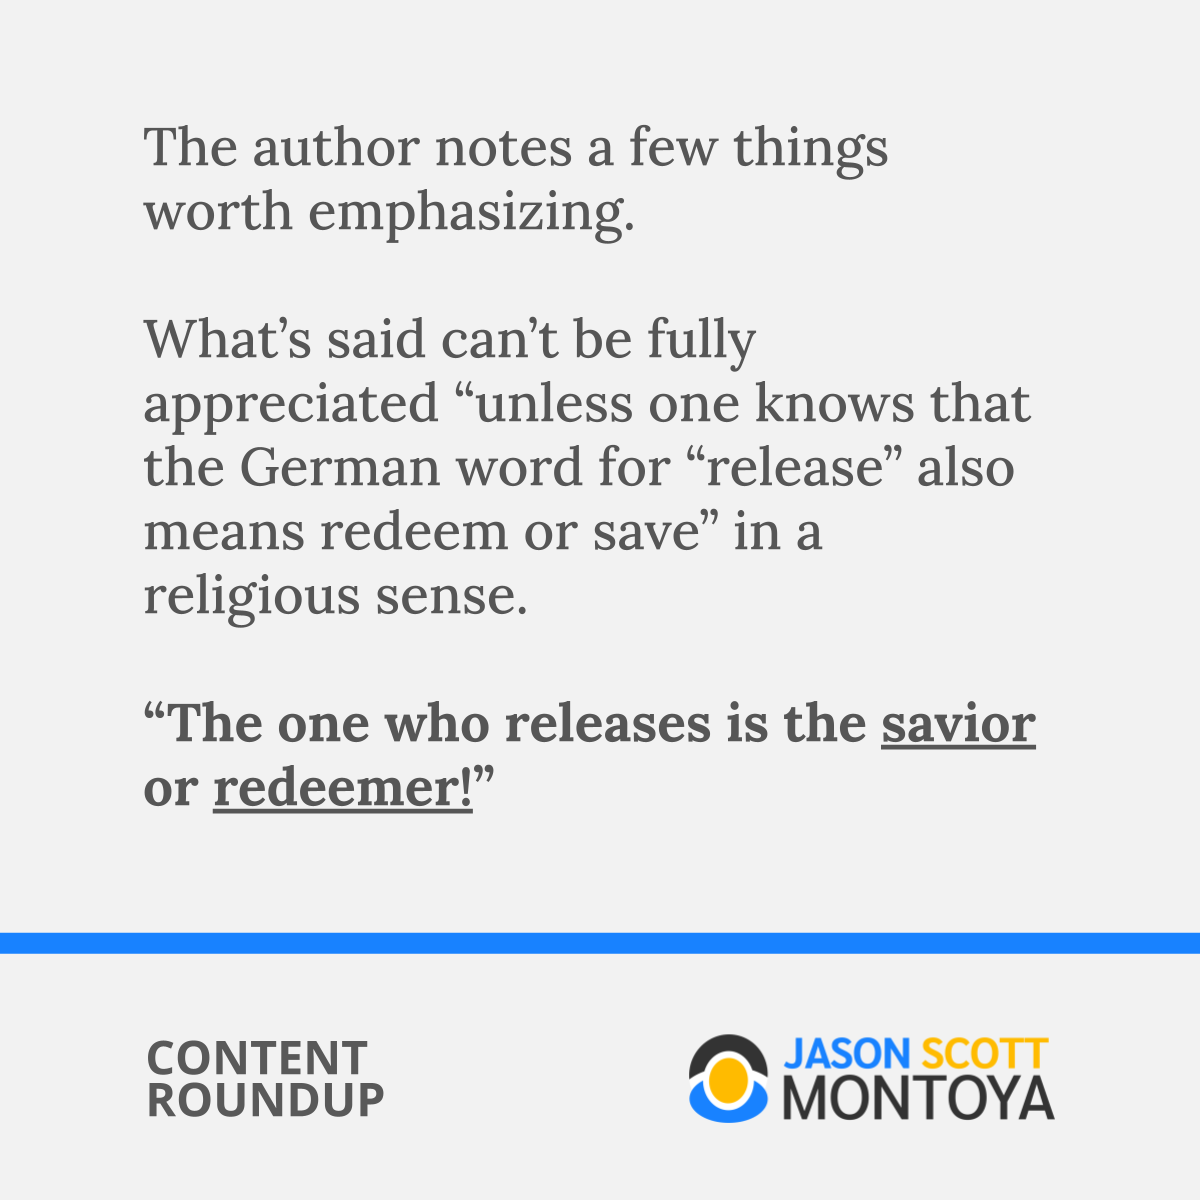 The author notes a few things worth emphasizing.  What’s said can’t be fully appreciated “unless one knows that the German word for “release” also means redeem or save” in a religious sense.  “The one who releases is the savior or redeemer!”